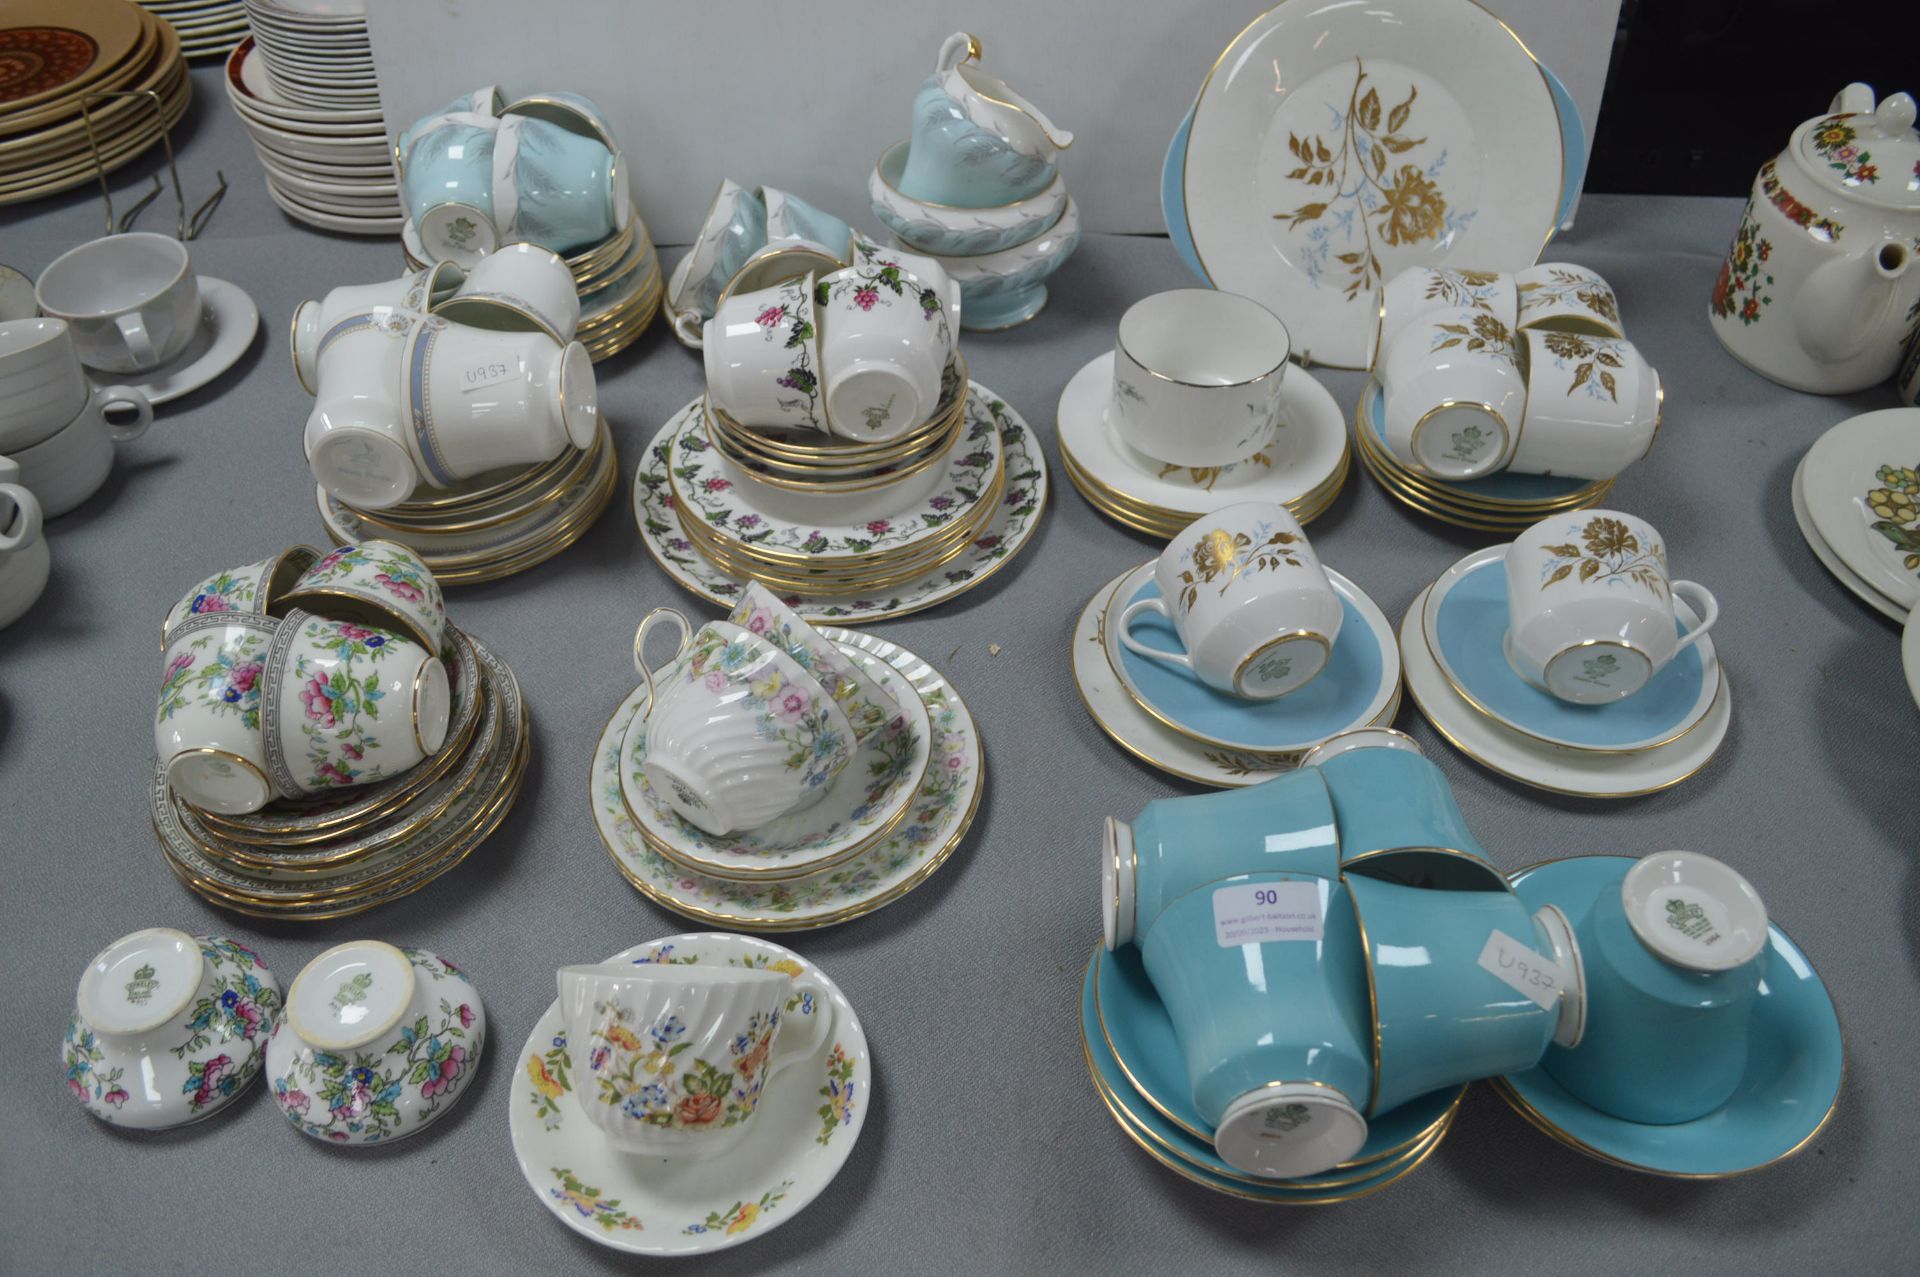 Assorted Aynsley Cups, Saucers, Plates, etc.